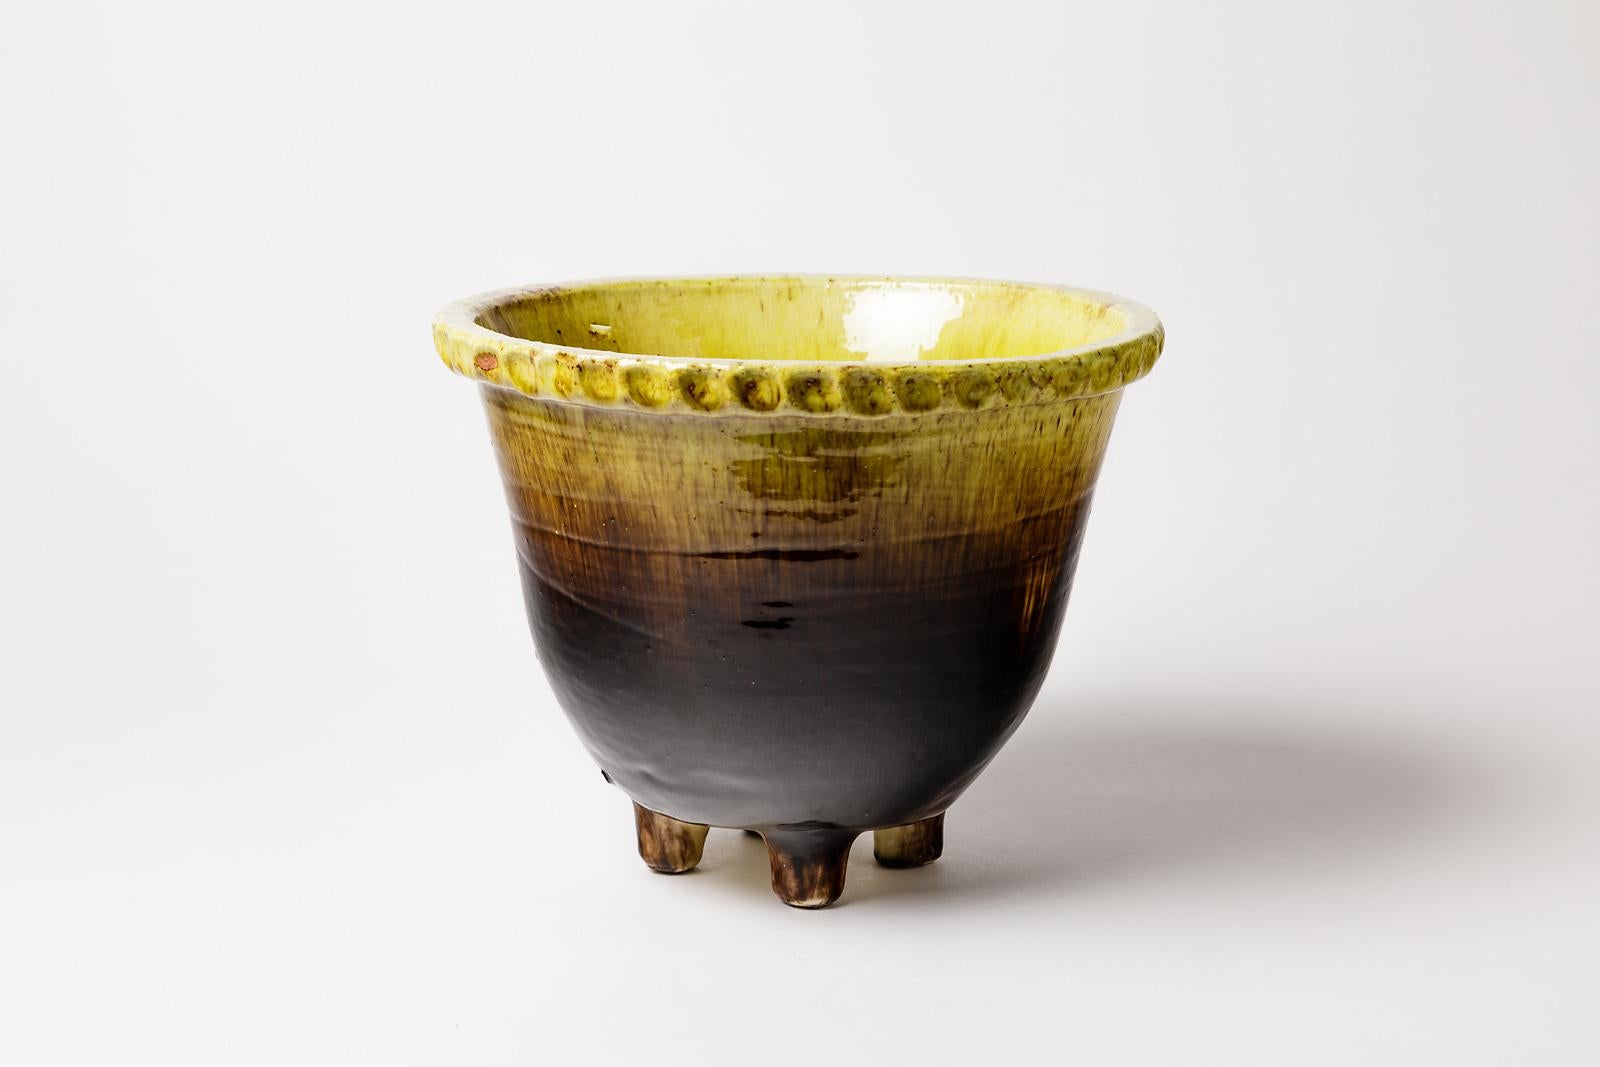 Accolay

Large and elegant mid-20th century ceramic flower pot, circa 1960.

Signed under the base.

Shiny black and yellow ceramic glazes colors.

Perfect original conditions

Measures: Height 22 cm, large 26 cm.